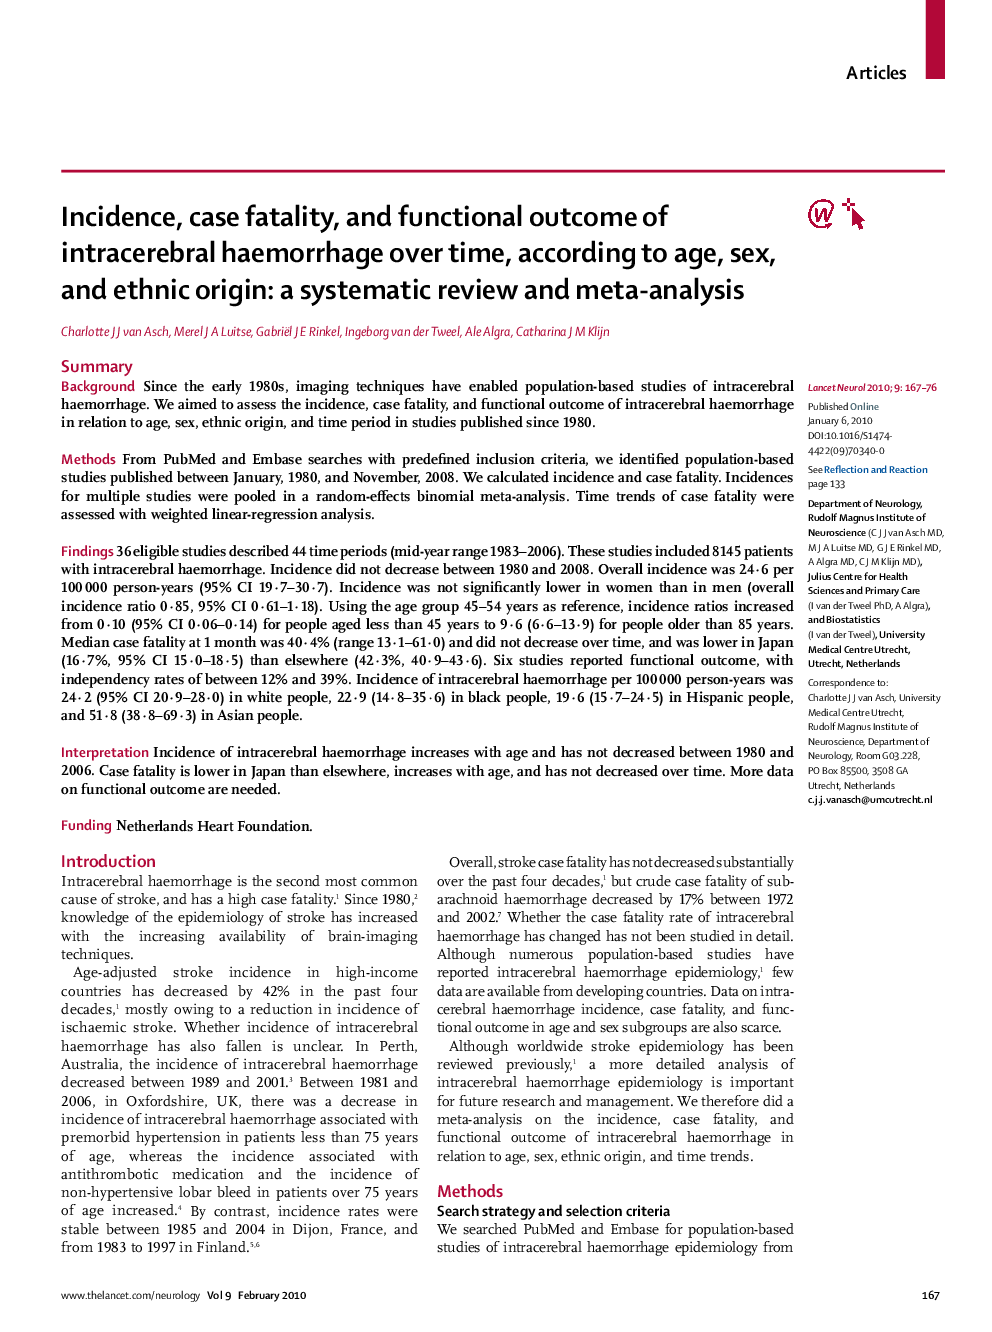 Incidence, case fatality, and functional outcome of intracerebral haemorrhage over time, according to age, sex, and ethnic origin: a systematic review and meta-analysis